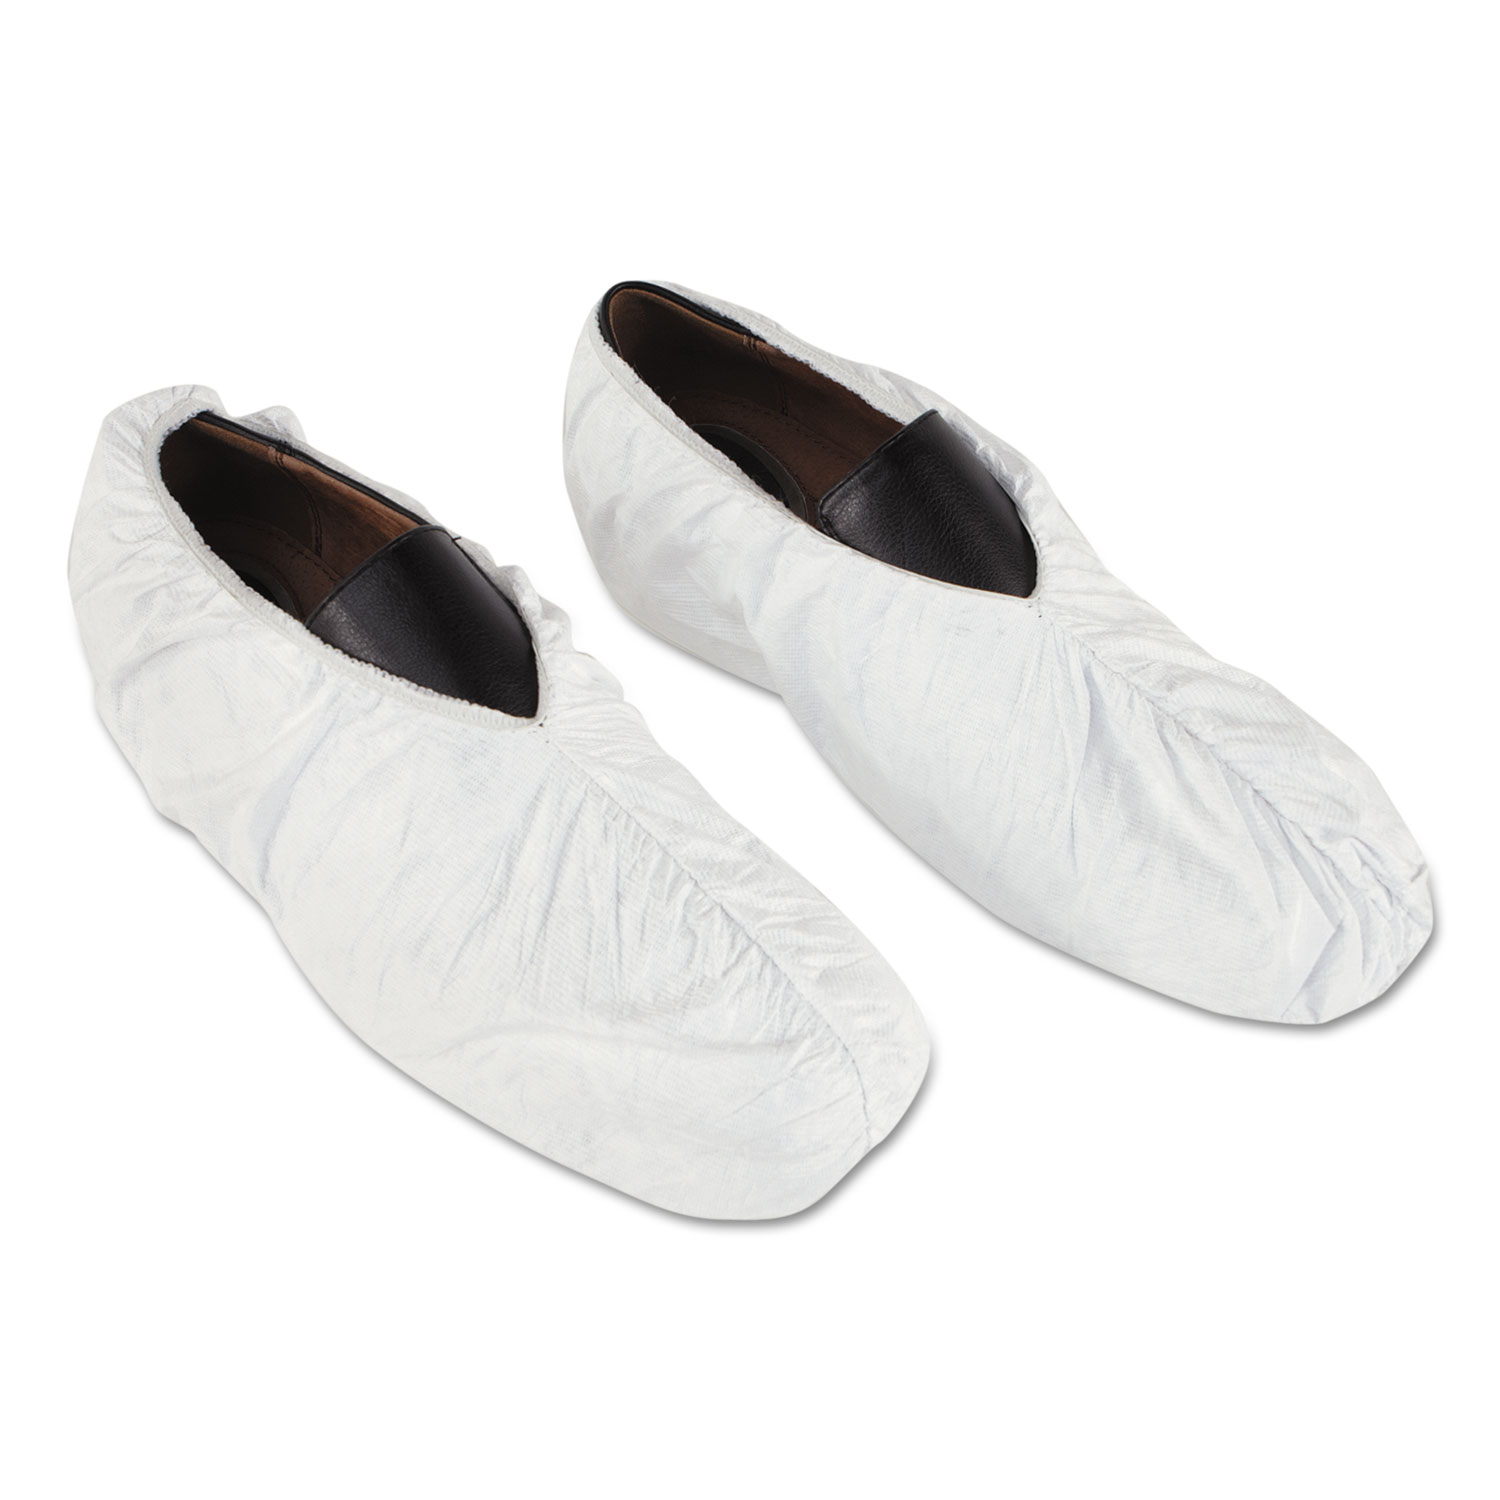  DuPont TY450SWH00020000 Tyvek Shoe Covers, White, One Size Fits All, 200/Carton (DUPTY450S) 